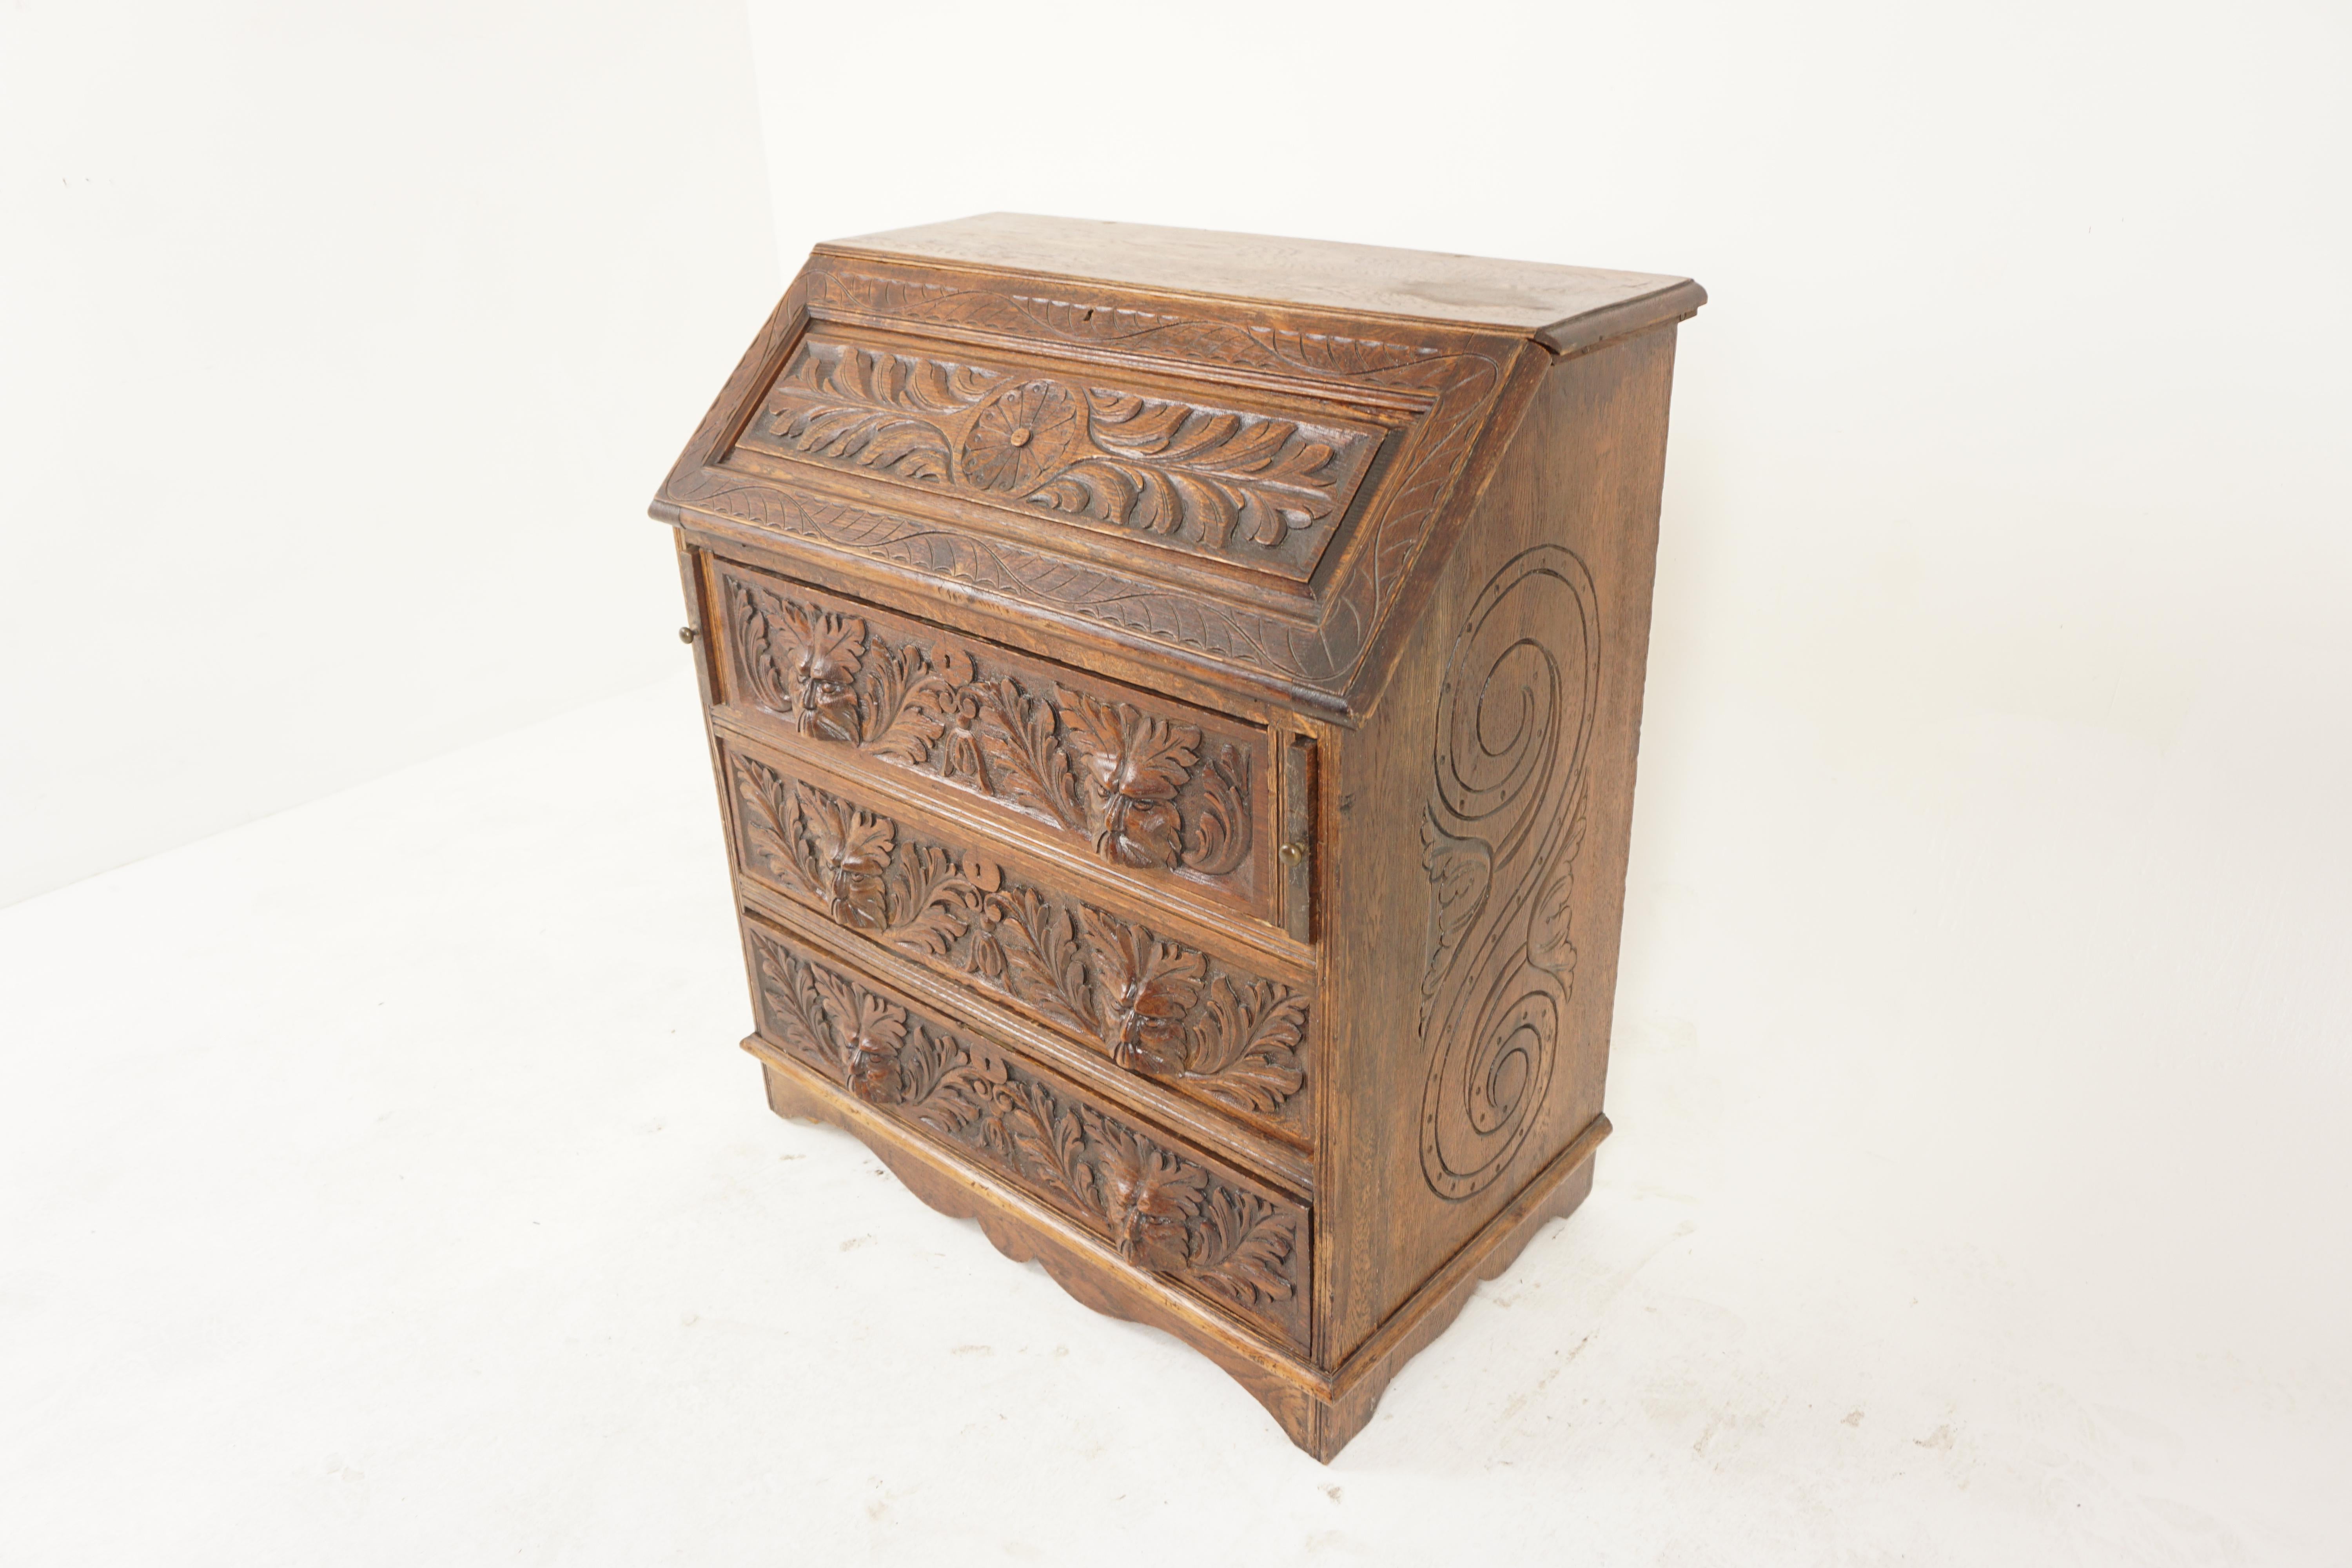 Carved Oak Victorian Green Man Fall Front Desk Bureau, Scotland 1880, H1170

Solid Oak
Original finish
Rectangular moulded top with bevelled edge
Carved fall front with foliate carving
When opened it reveals a fitted interior with three pigeon holes